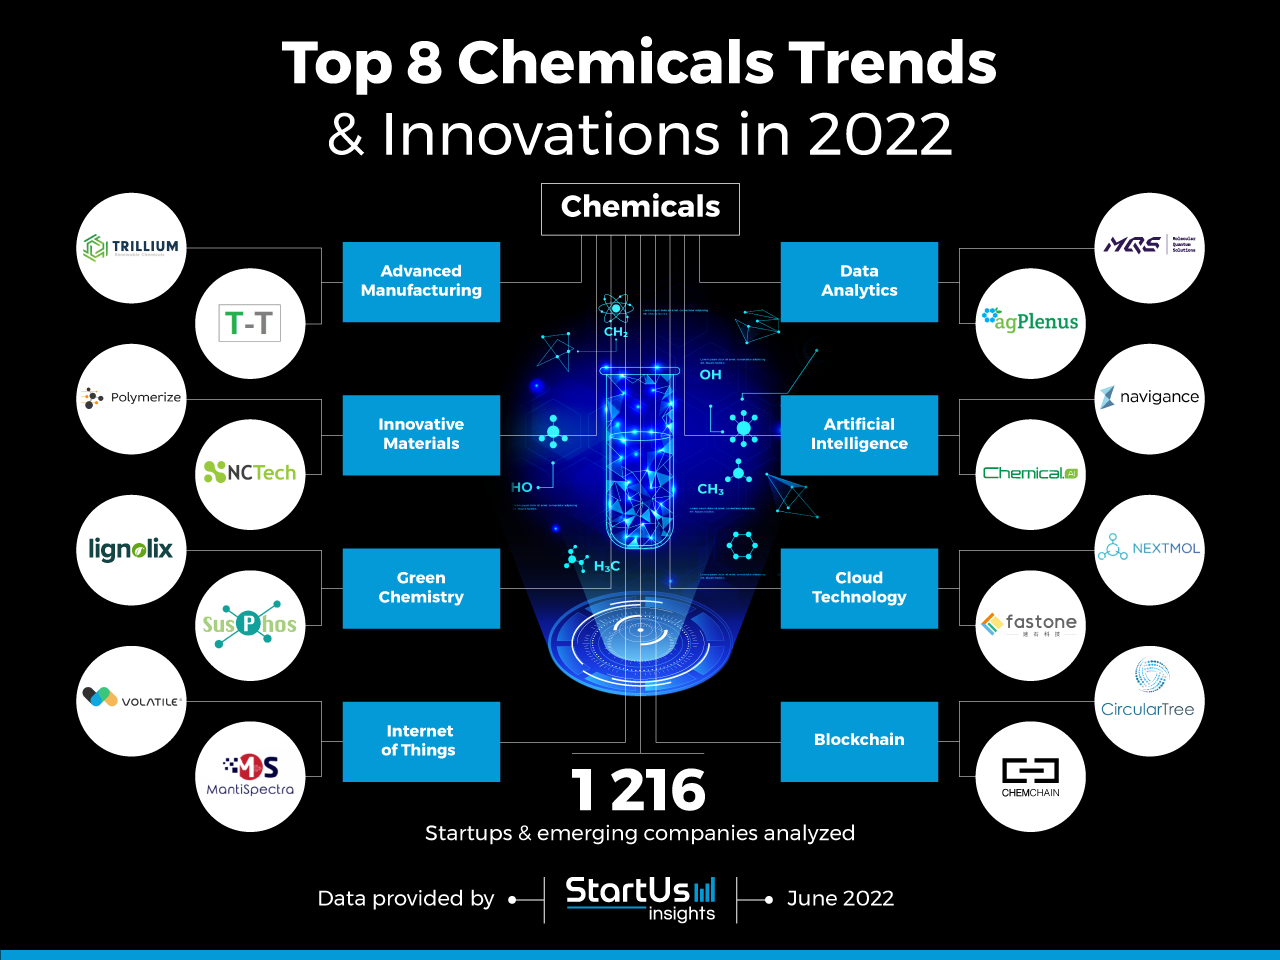 Top 8 Chemicals Trends & Innovations in 2022